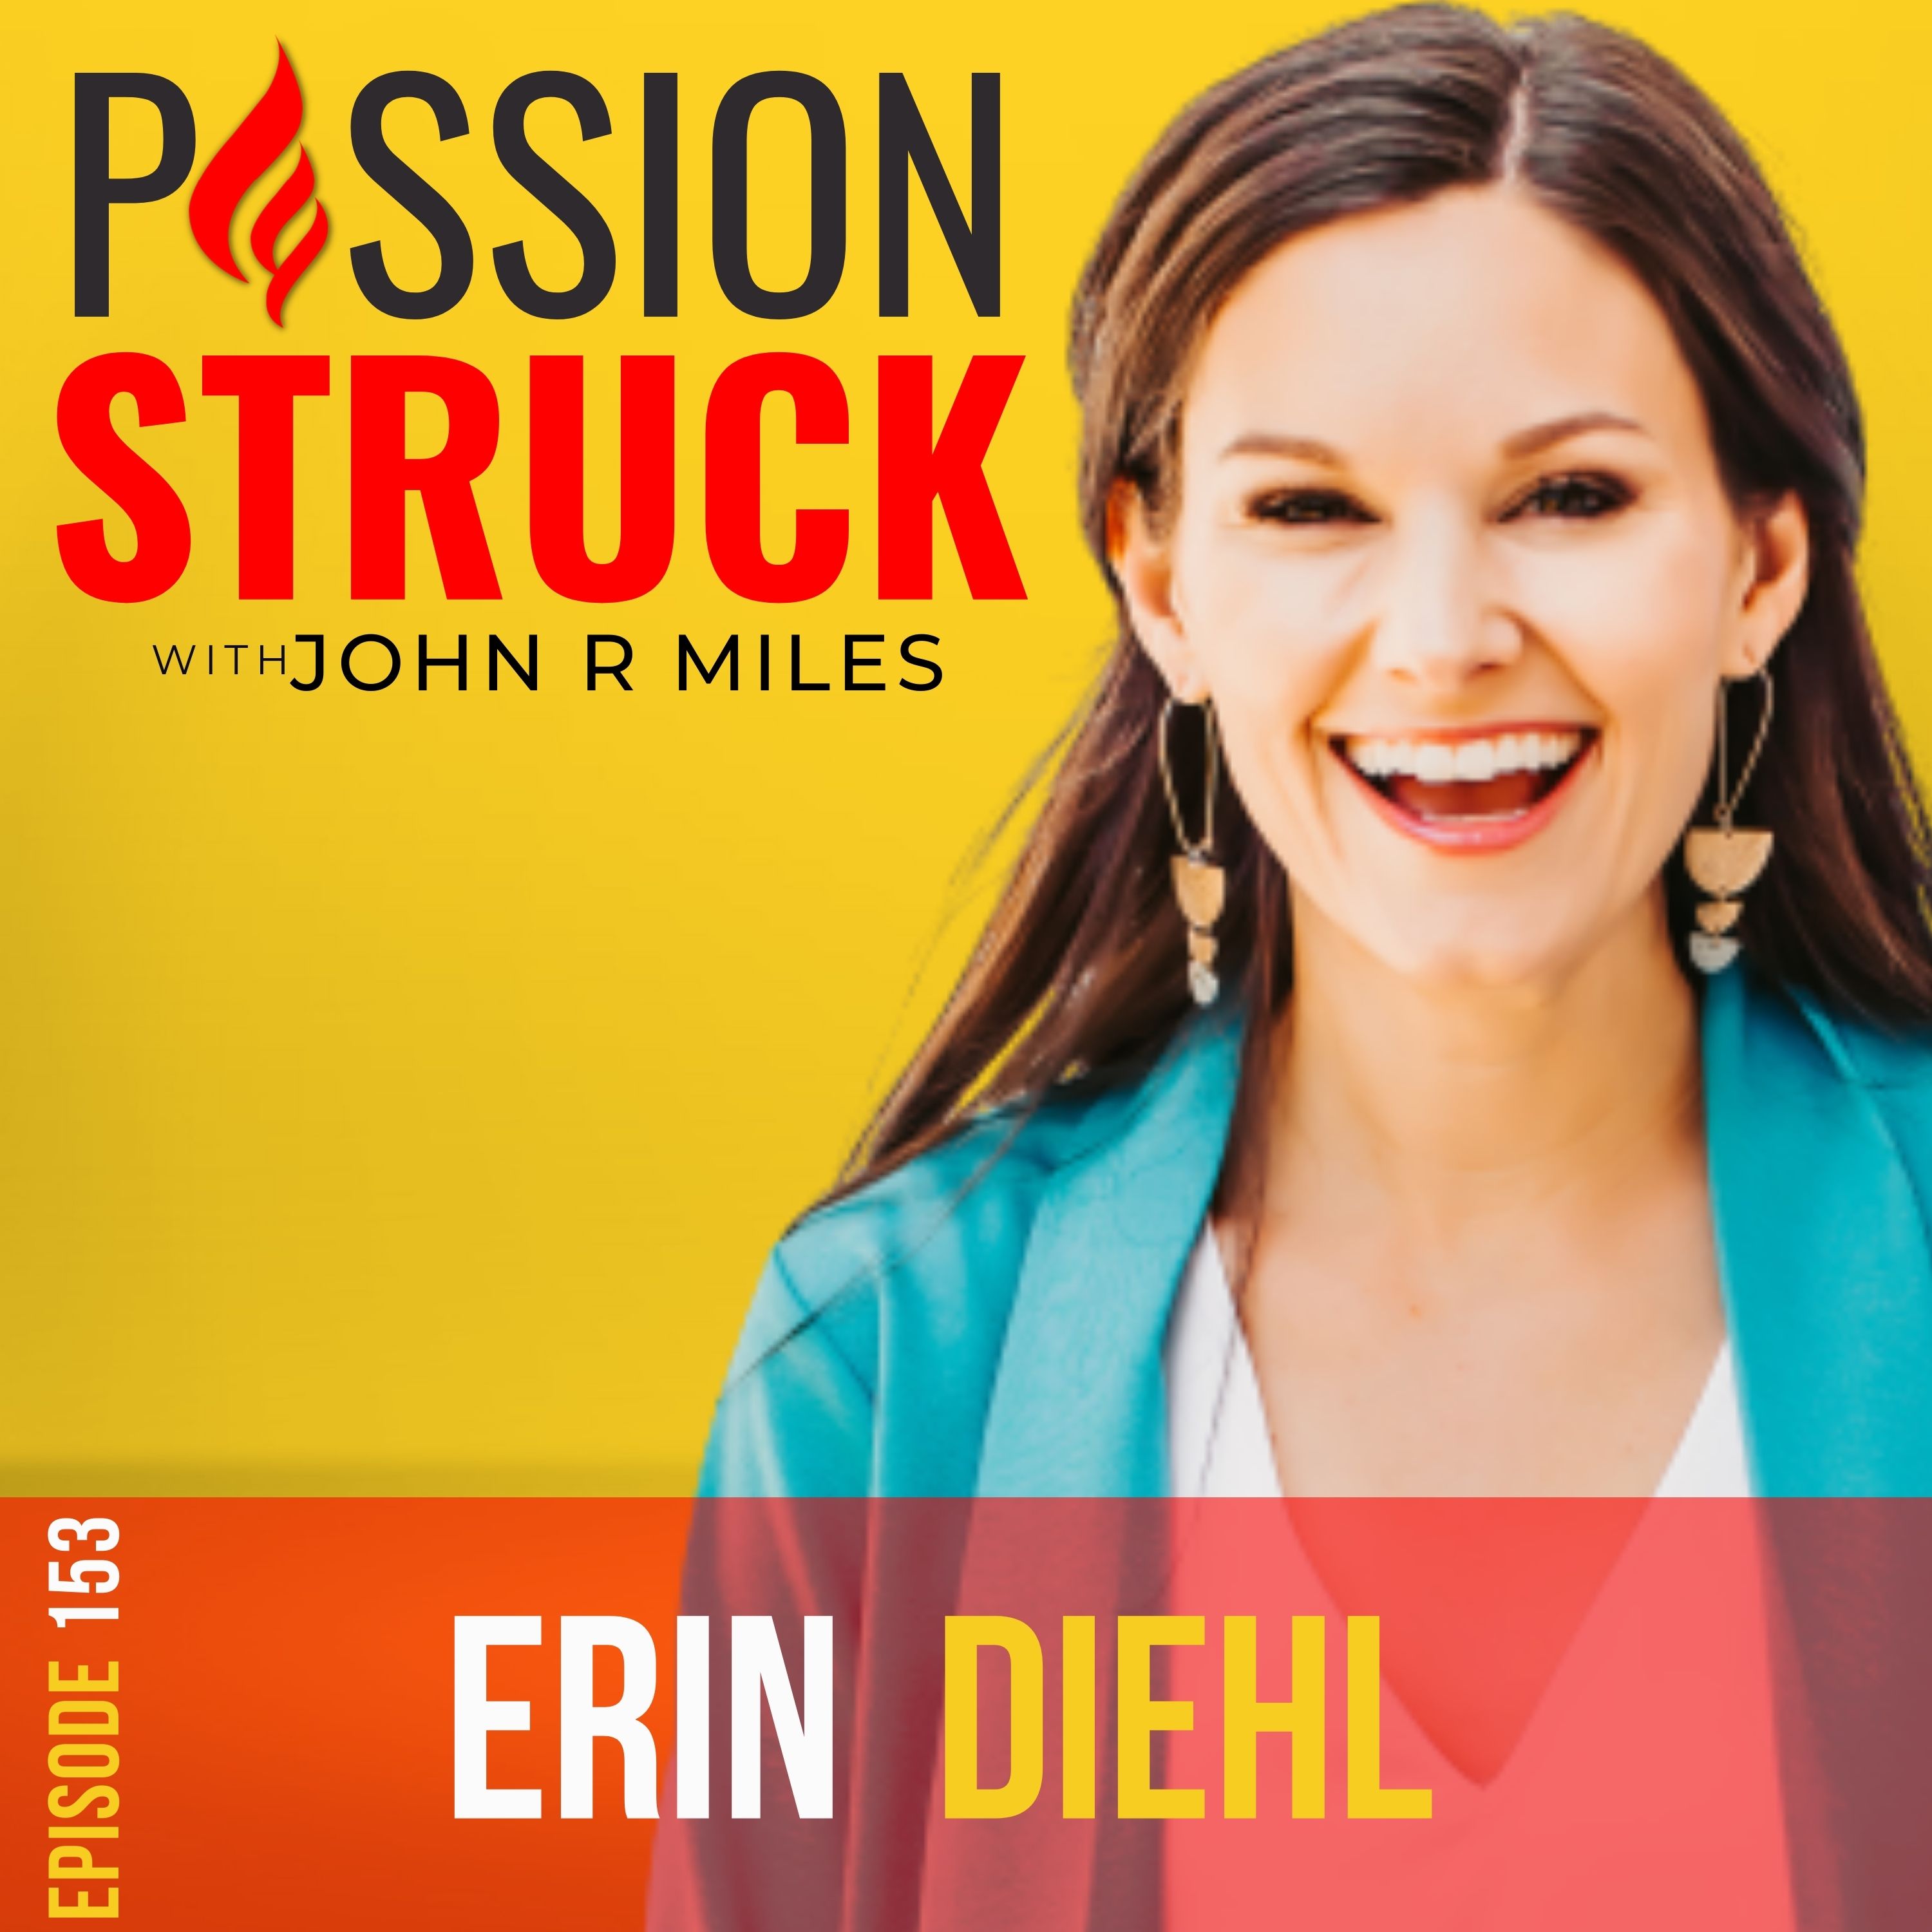 Passion Struck with John R. Miles album cover for episode 153 with Erin Diehl